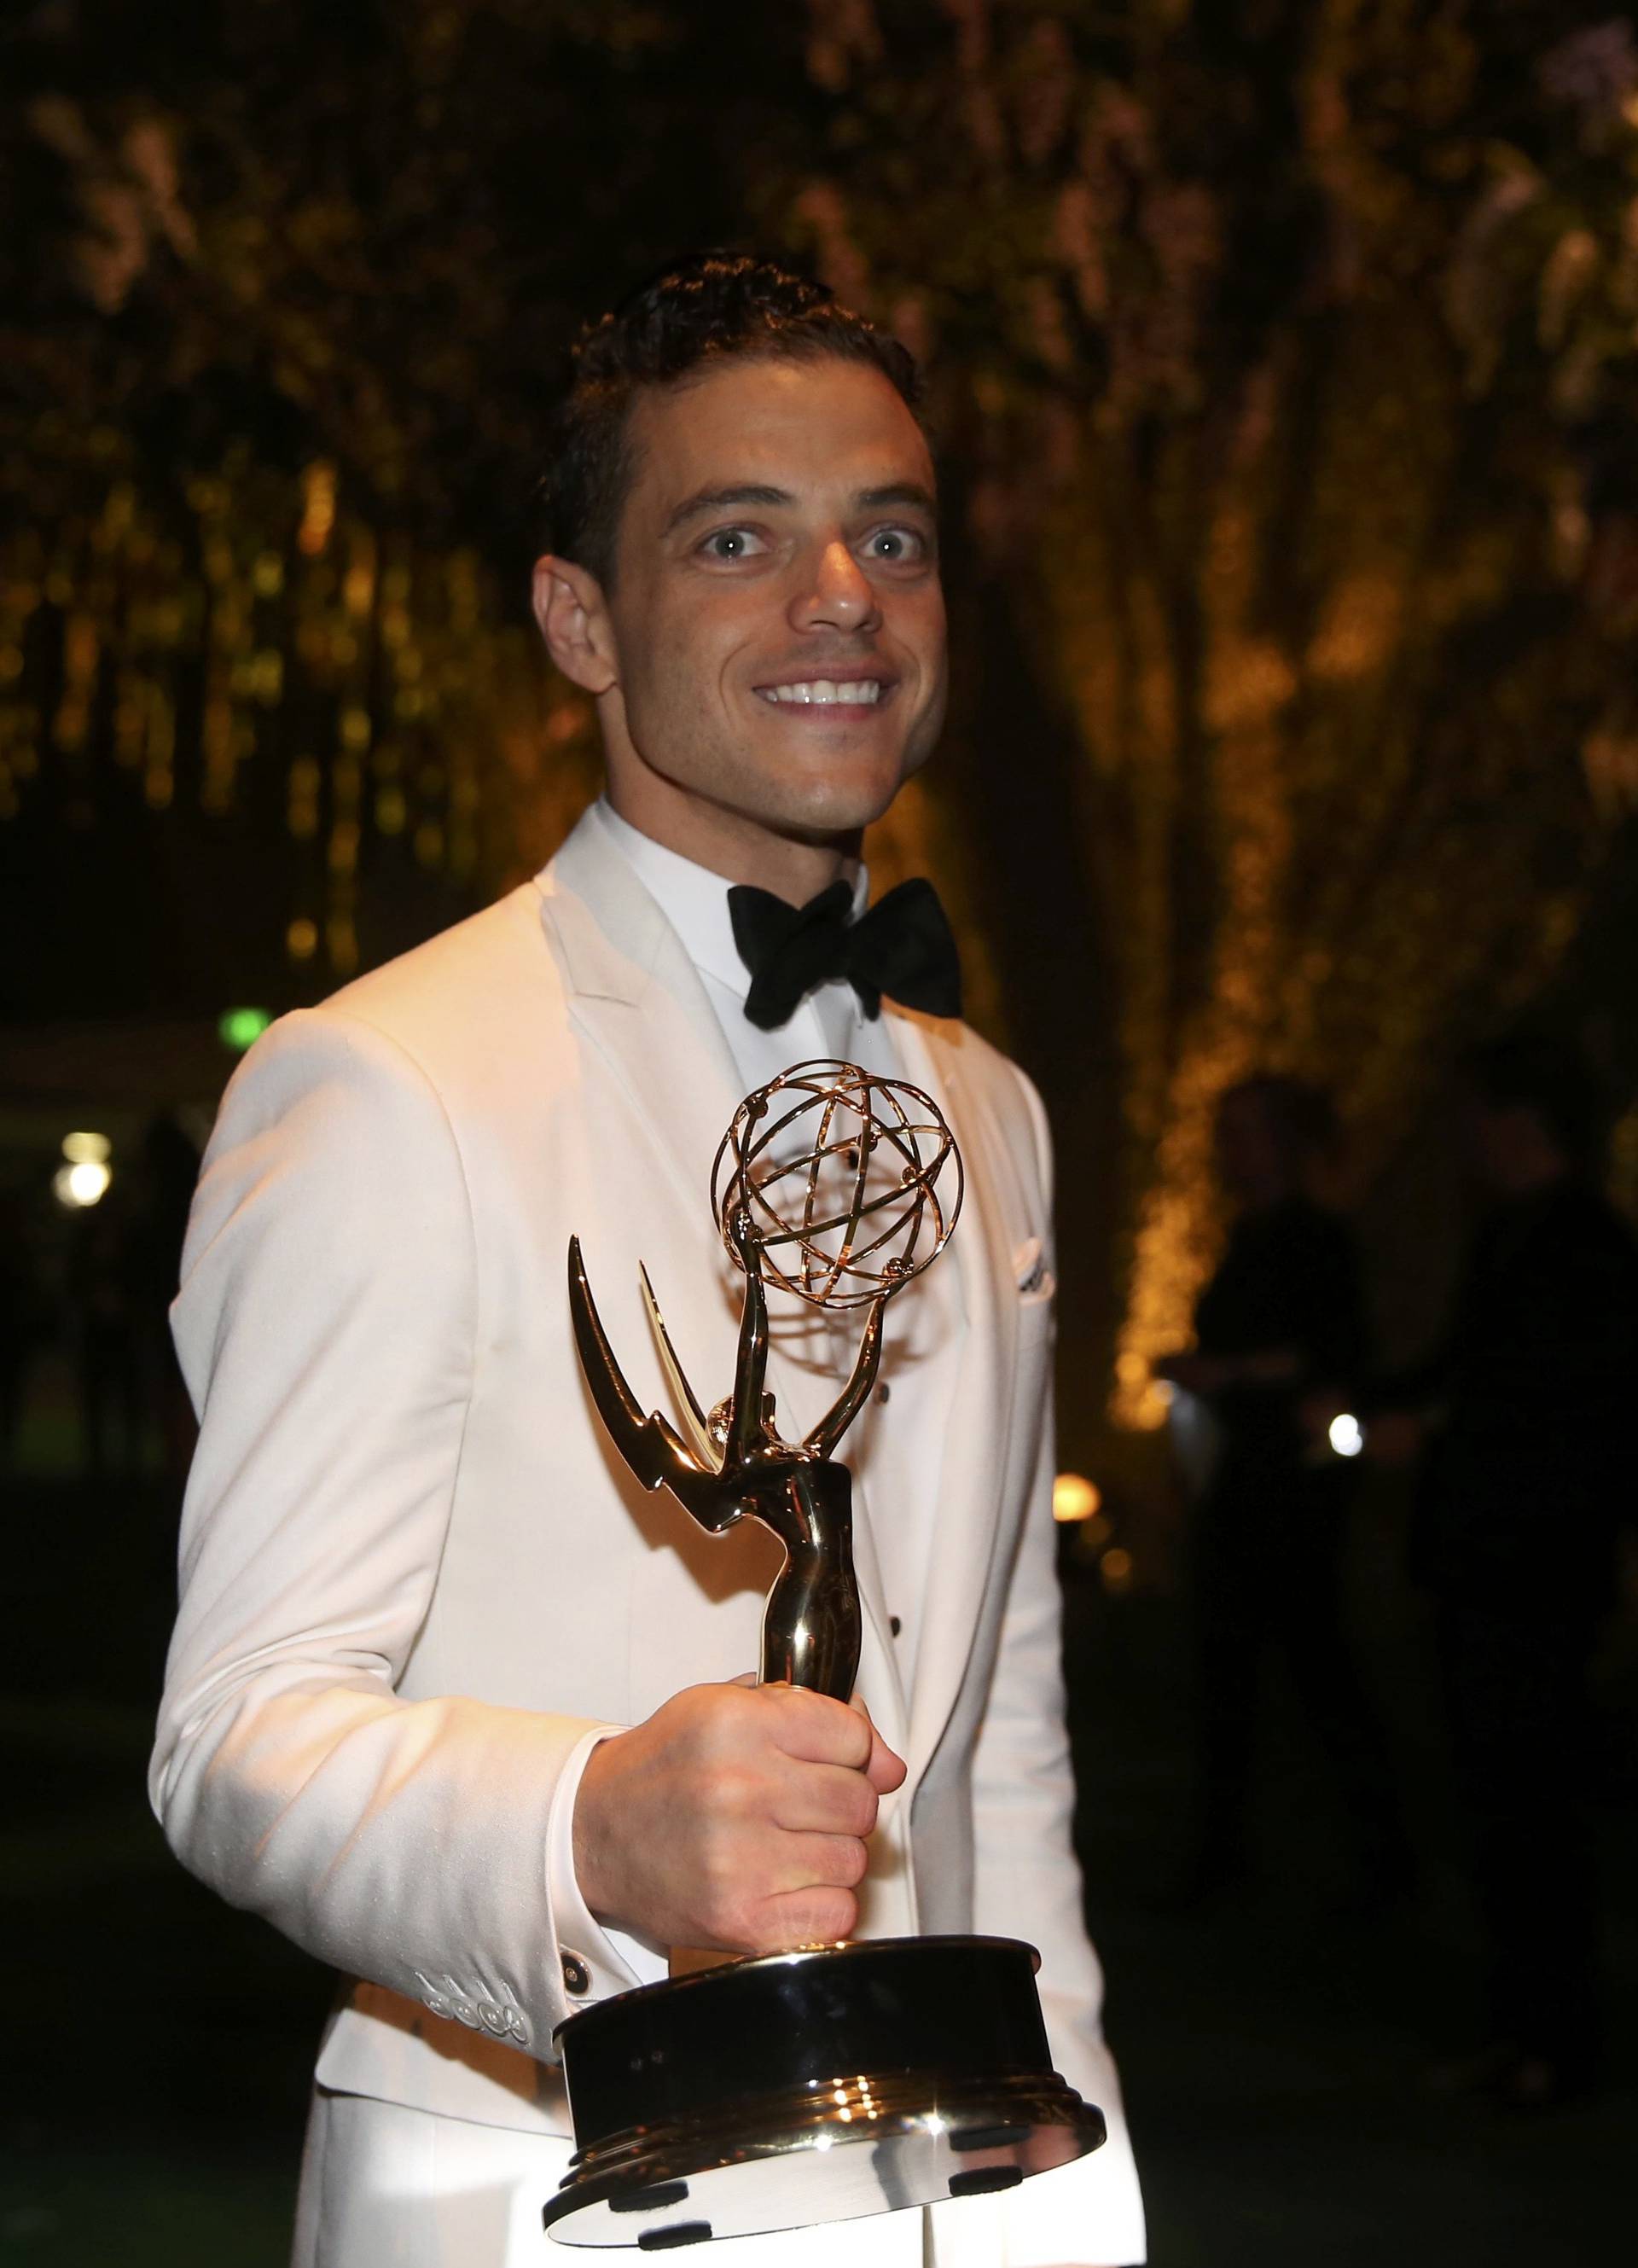 Rami Malek holds his award for Outstanding Lead Actor In A Drama Series as he arrives at the Governors Ball after the 68th Primetime Emmy Awards in Los Angeles